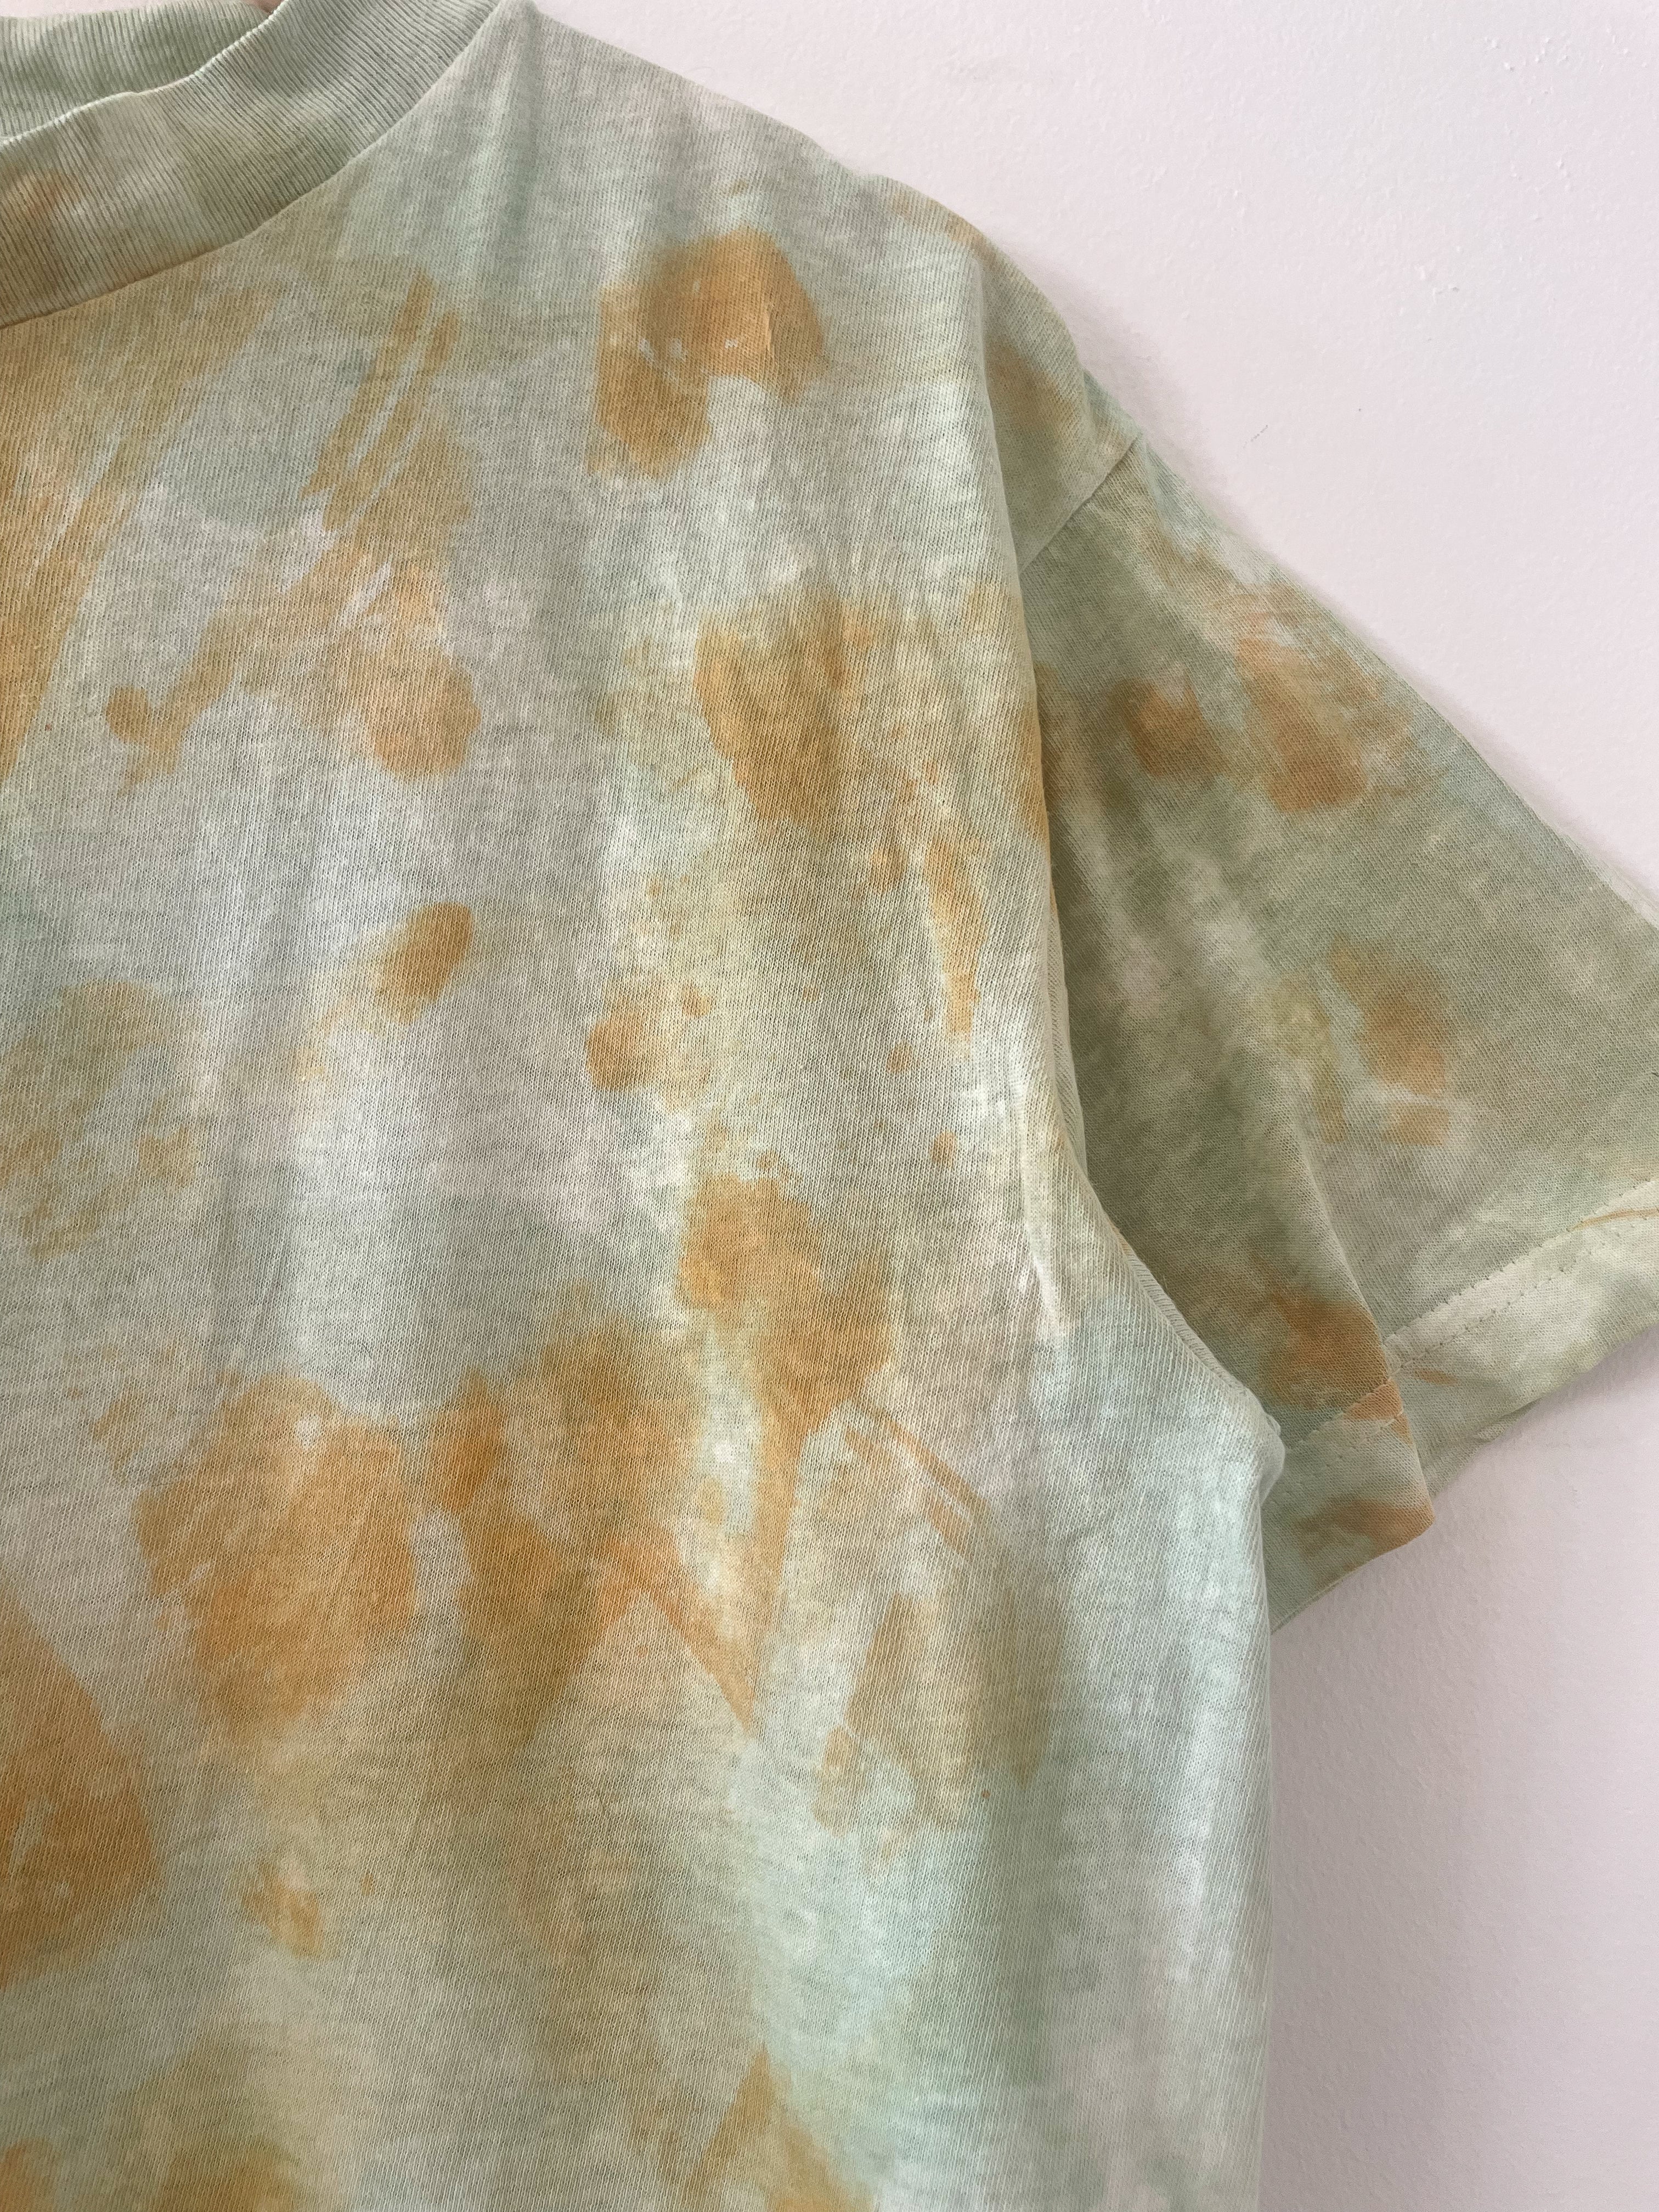 Hand-Dyed & Painted Cotton T-shirt - Chlorophyll